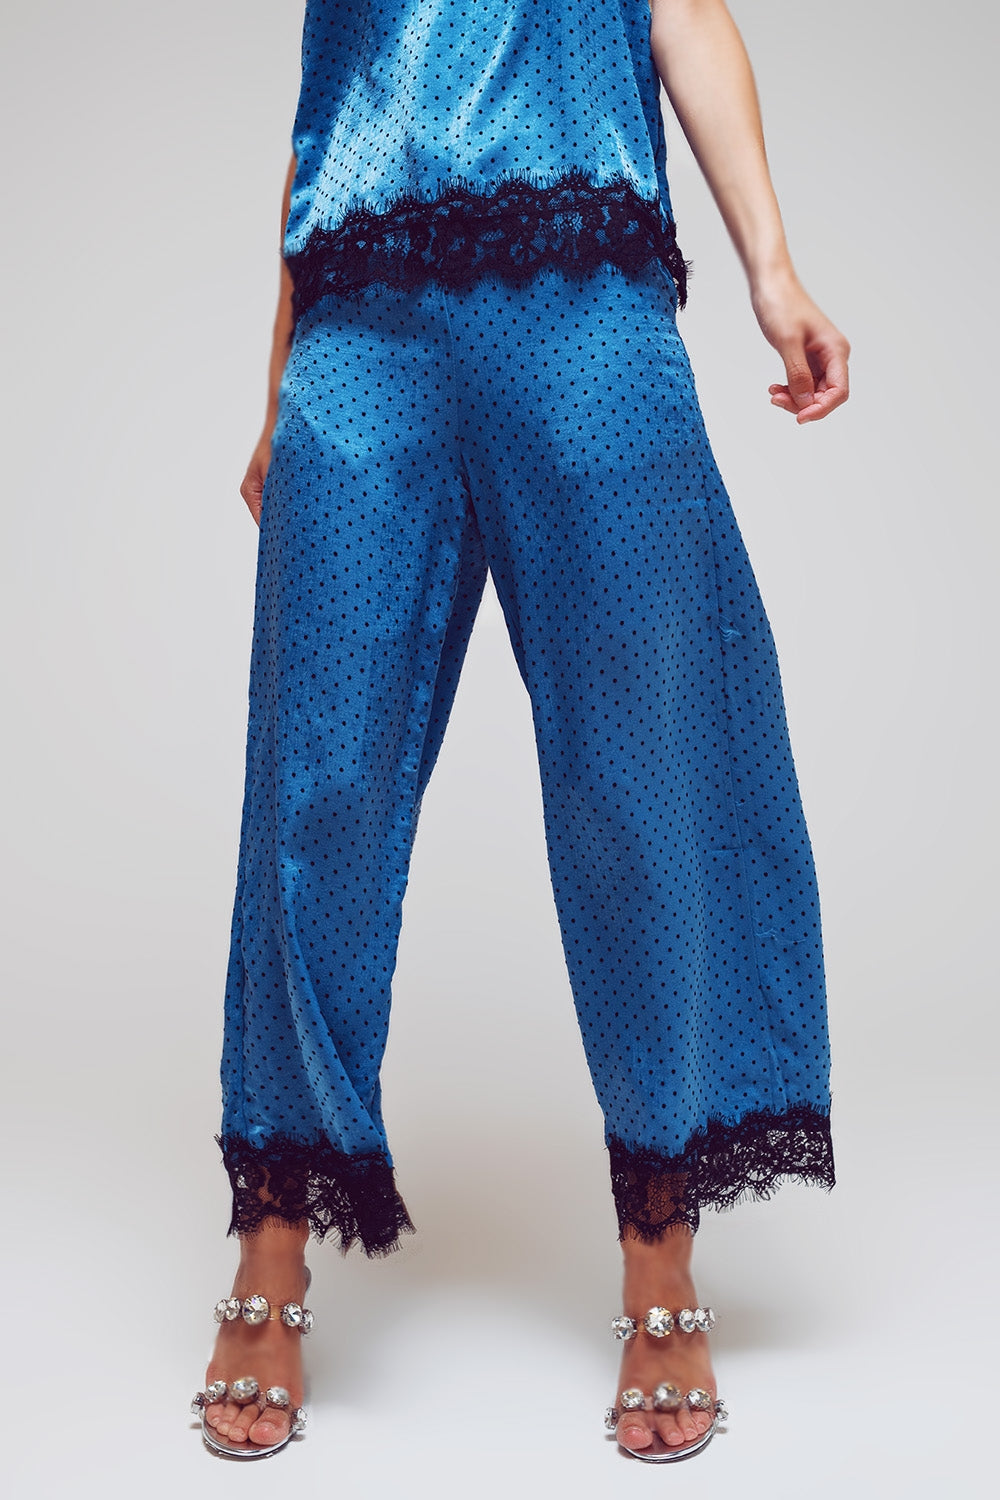 Q2 wide dotted pants with lace at the hems